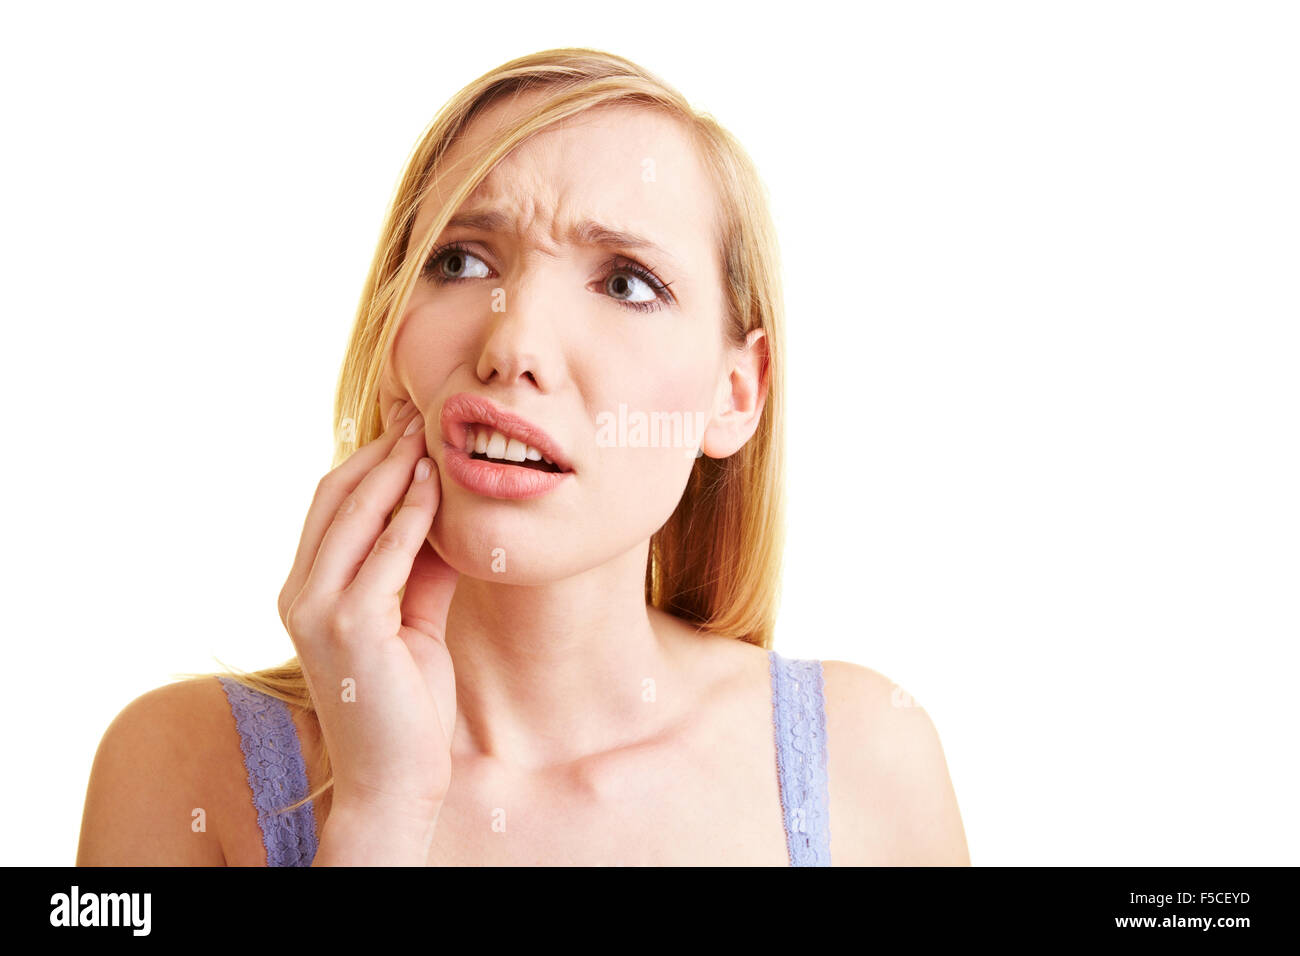 Young blonde woman with toothache holding her cheek Stock Photo